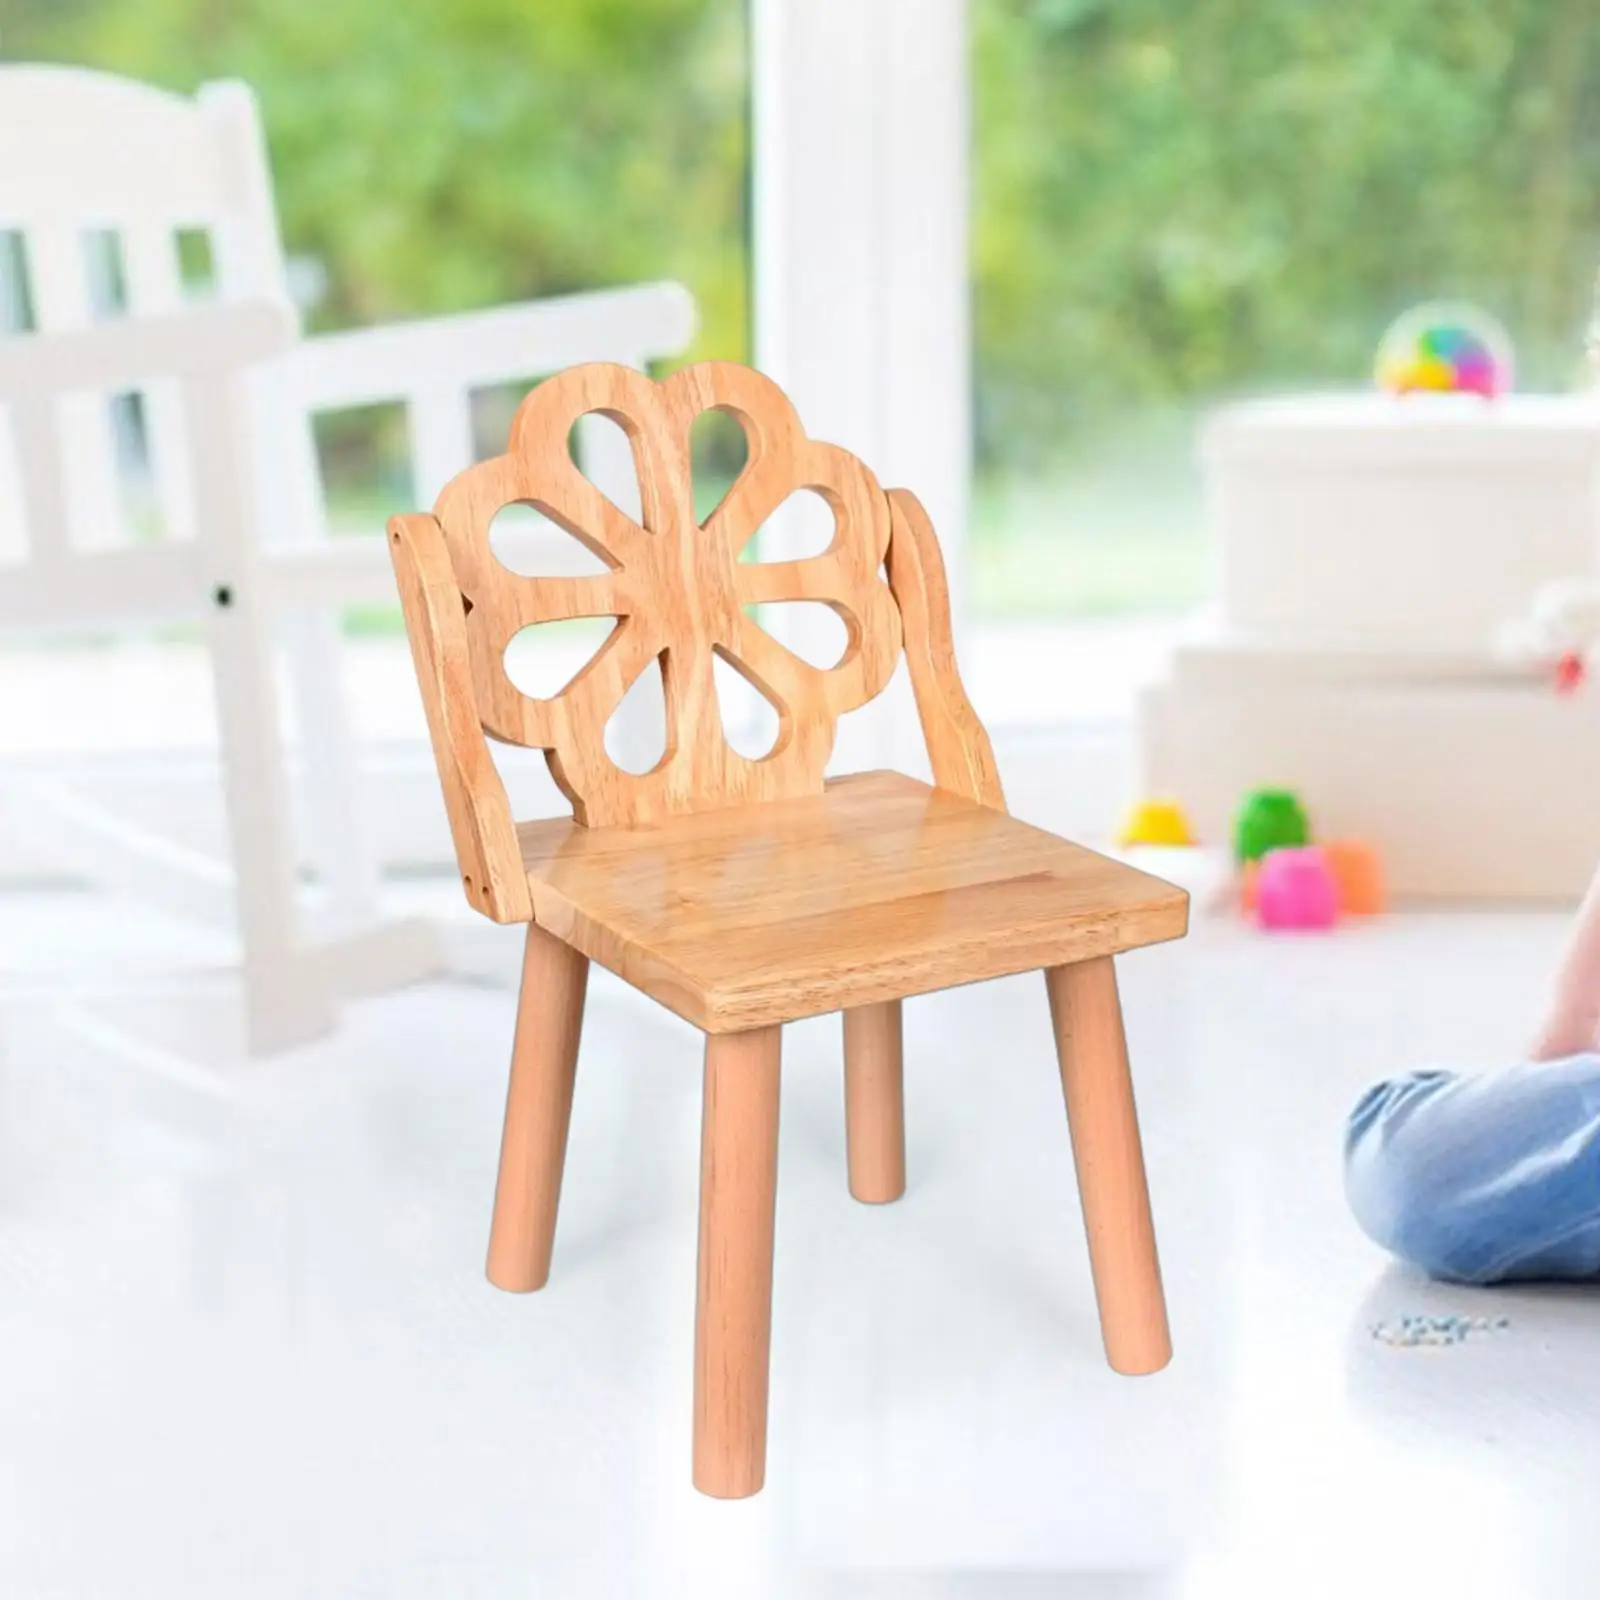 Protable Removable Wooden Child Stool Heavy Duty Storage Shelf Space Saving Wood High Chair Small Seat Stool for Kids for Home